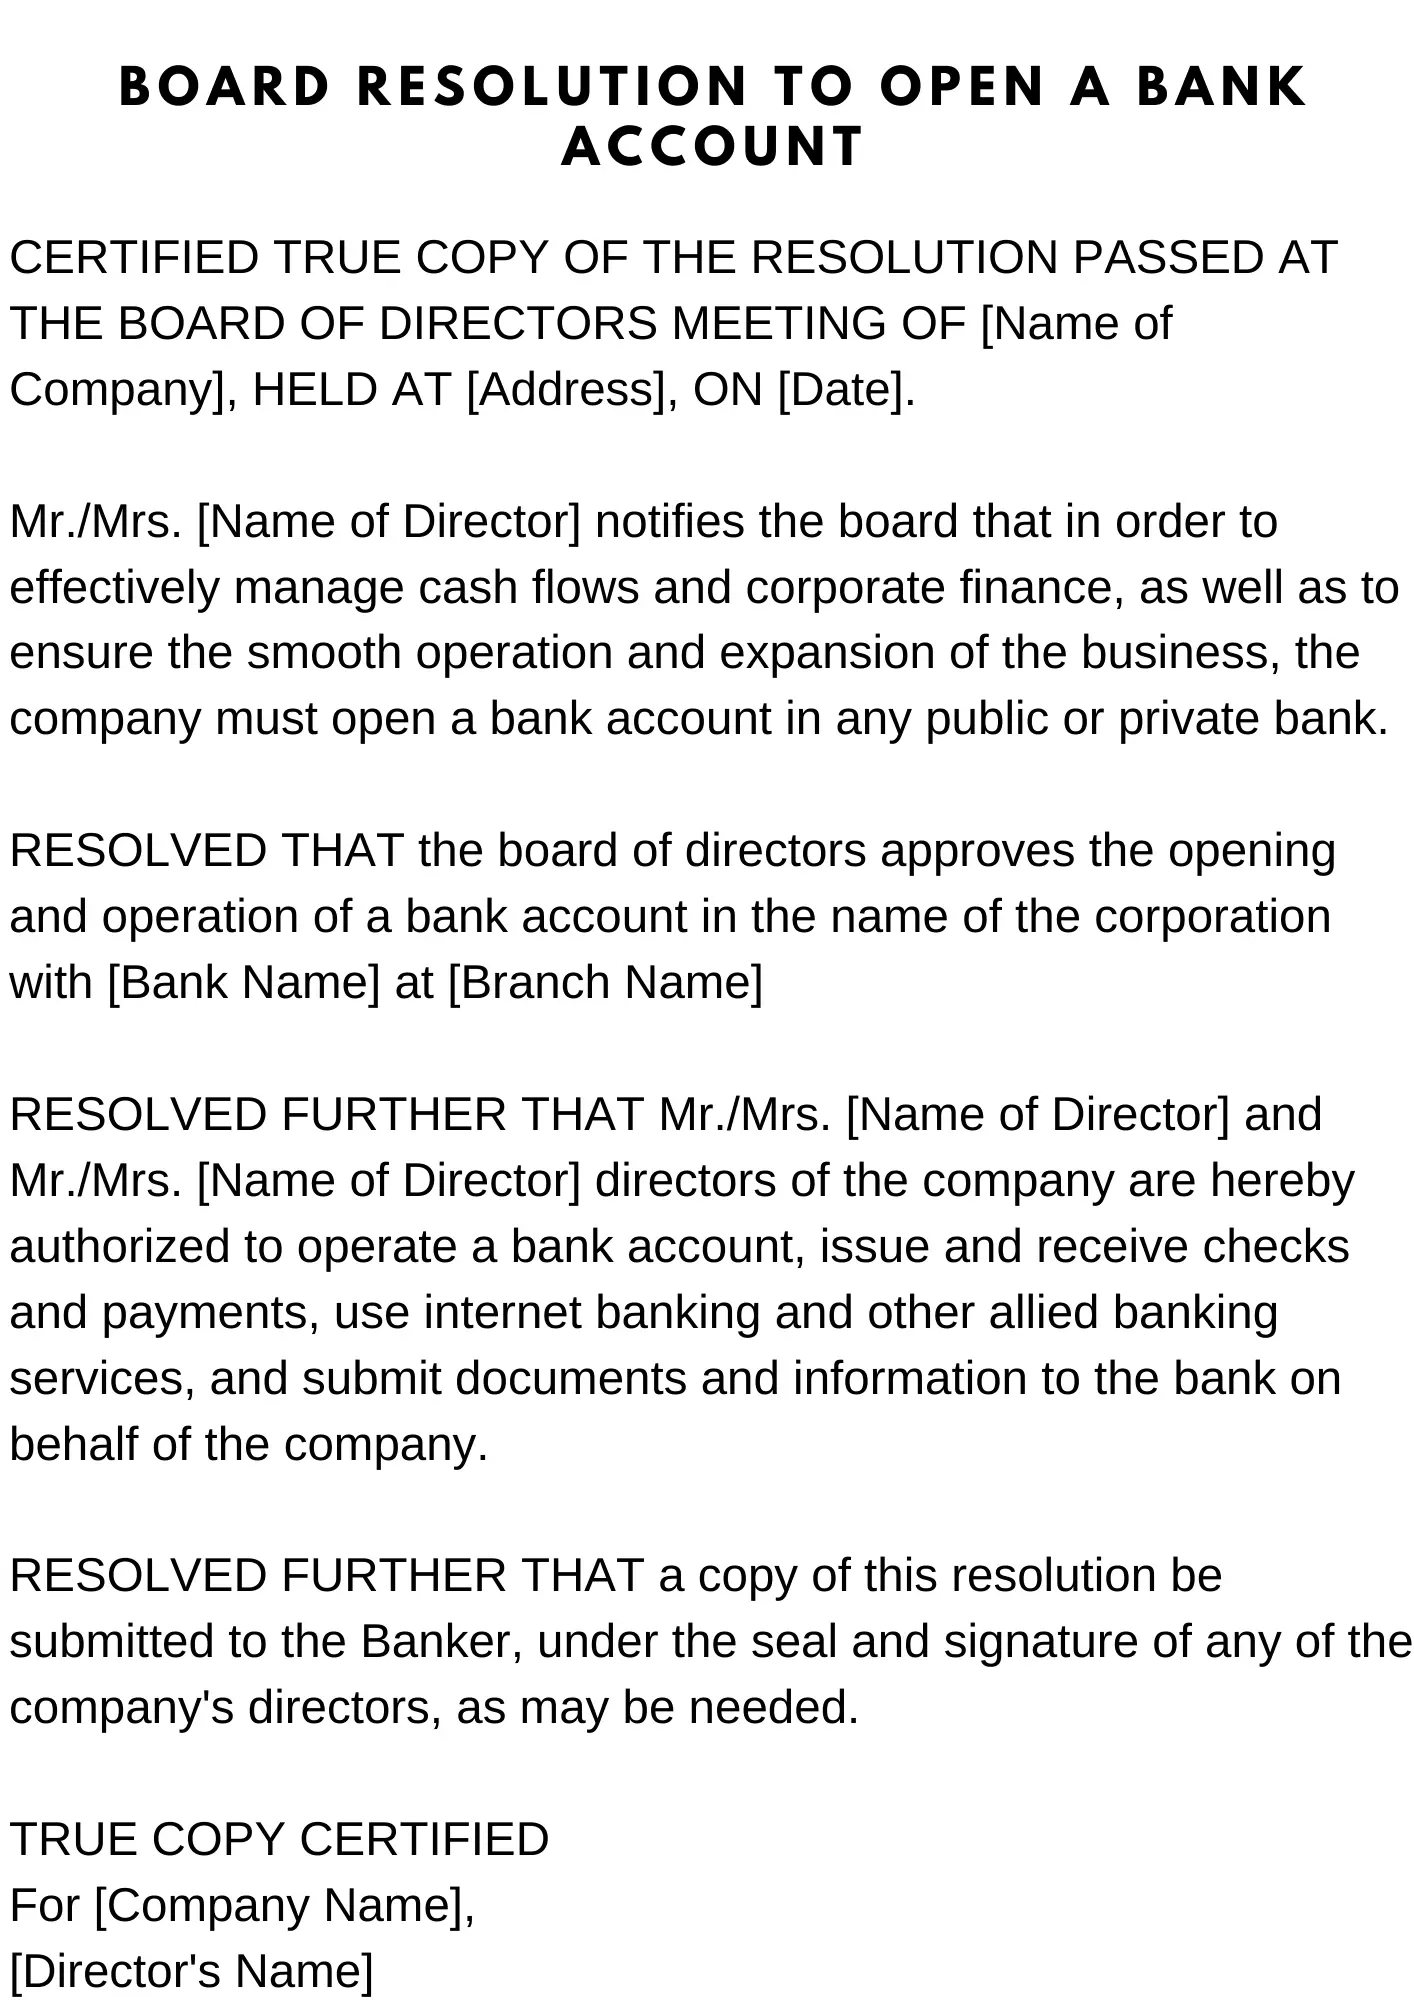 board Resolution to open a bank account